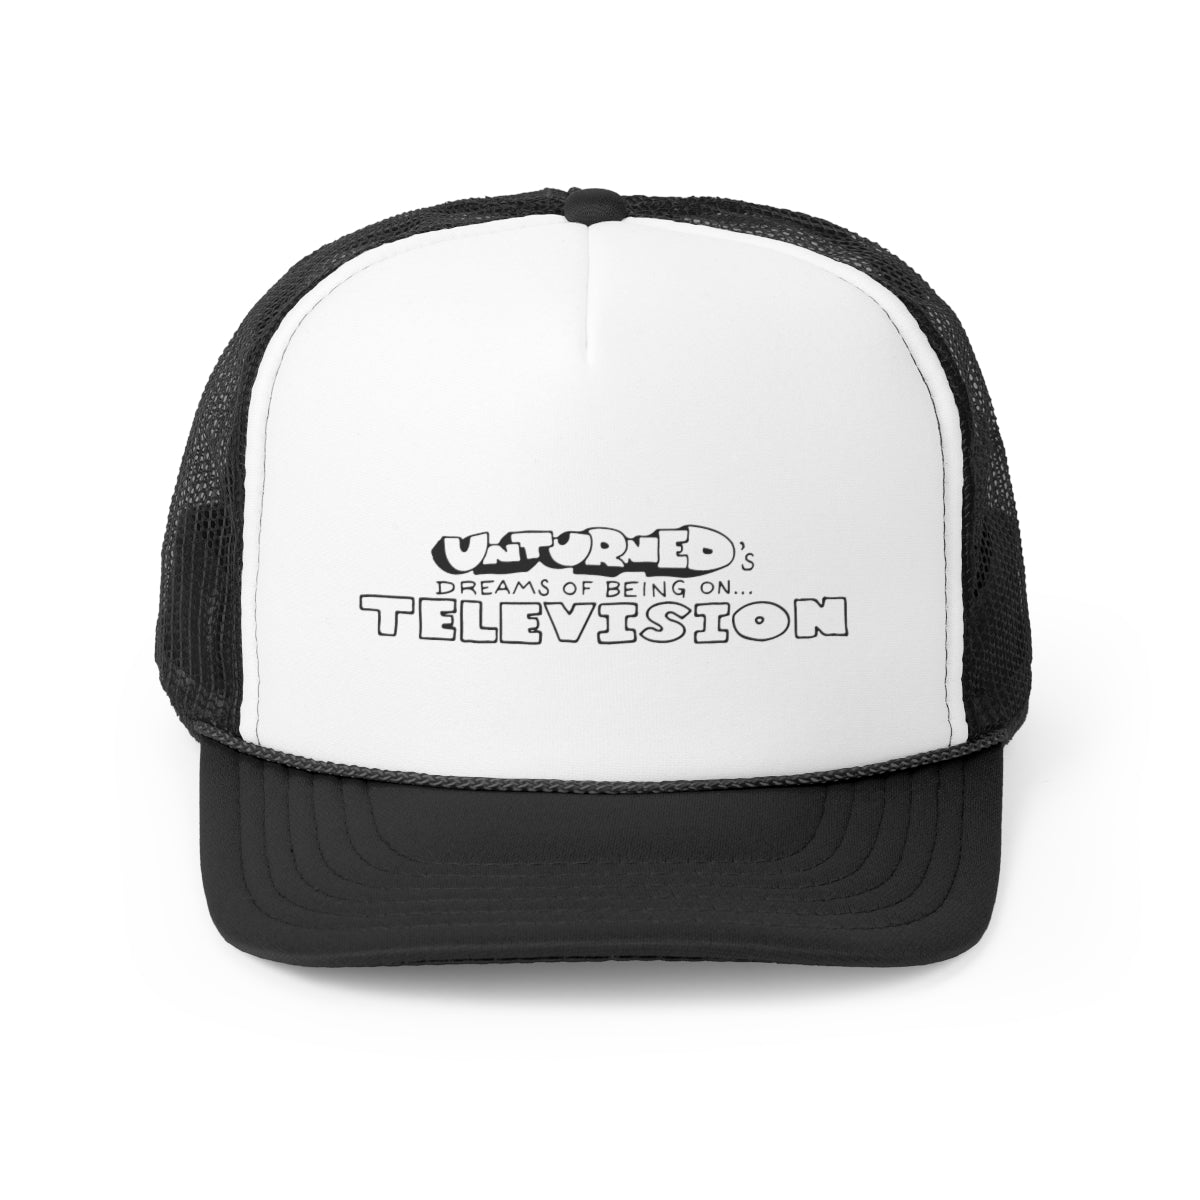 Dreams of Being on Television Trucker Cap - NO SLEEP RECORDS - Unturned